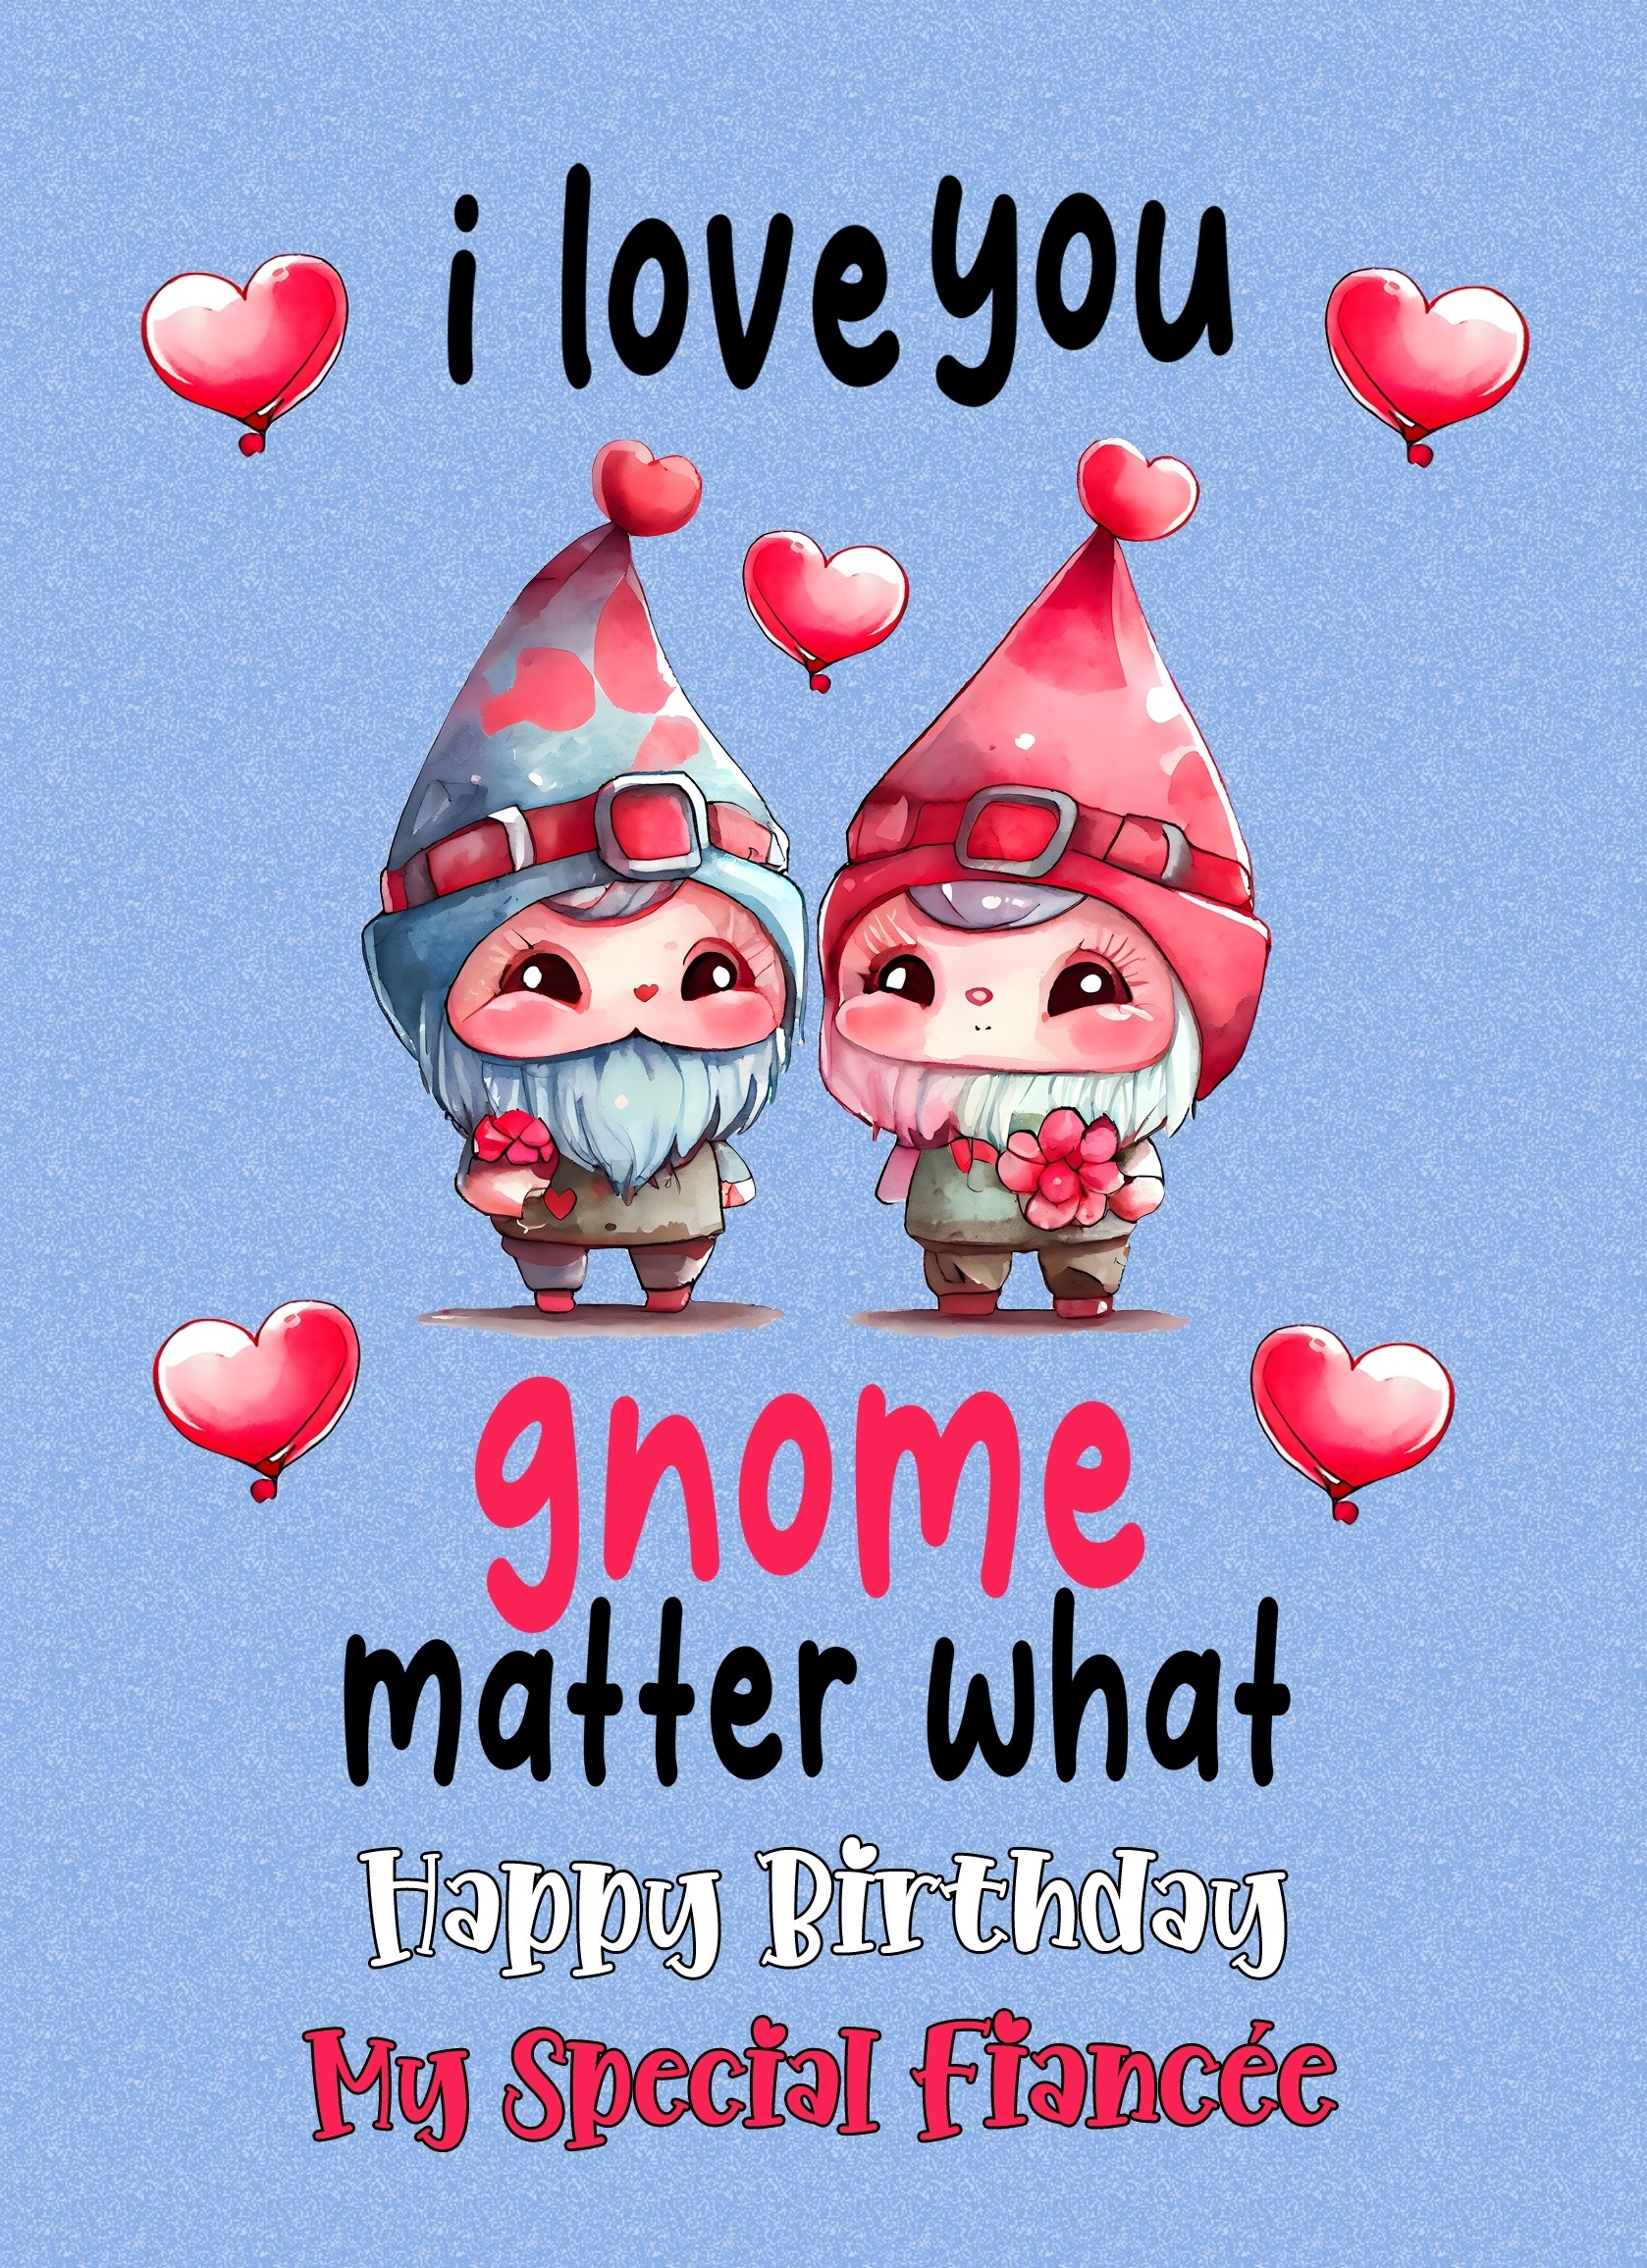 Funny Pun Romantic Birthday Card for Fiancee (Gnome Matter)